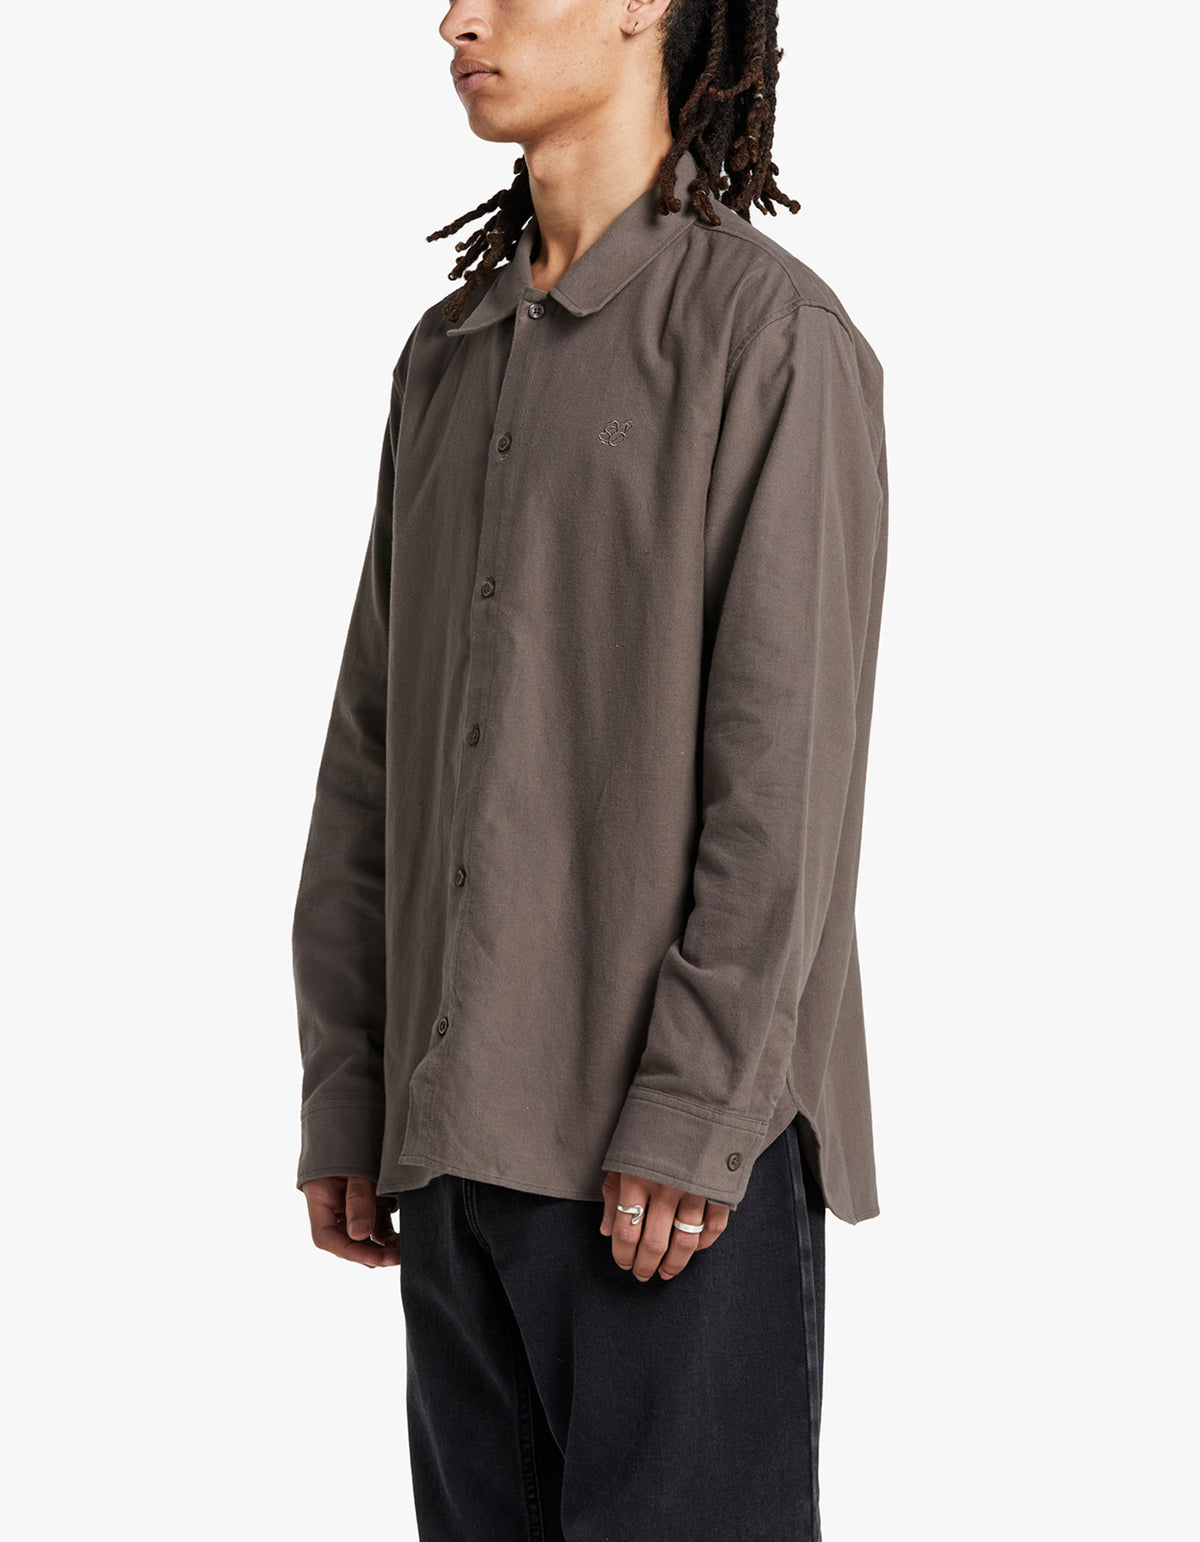 Superette | Broome Flannel Long Sleeve Shirt - Bungee